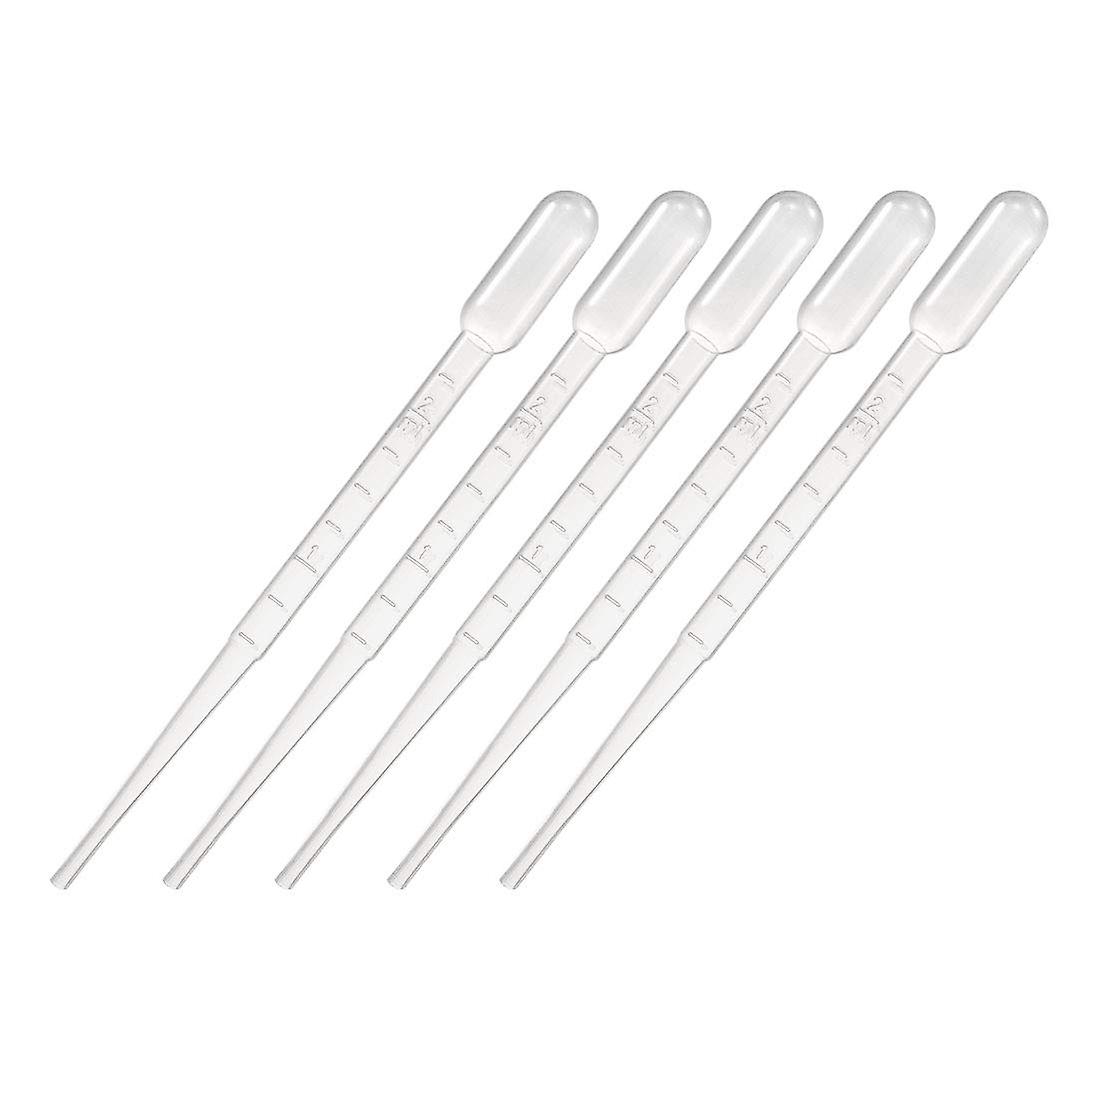 Plastic Pasteur Pipettes 3ml. 1ml grads w/ 0.25ml inc (Pack of 100) product photo